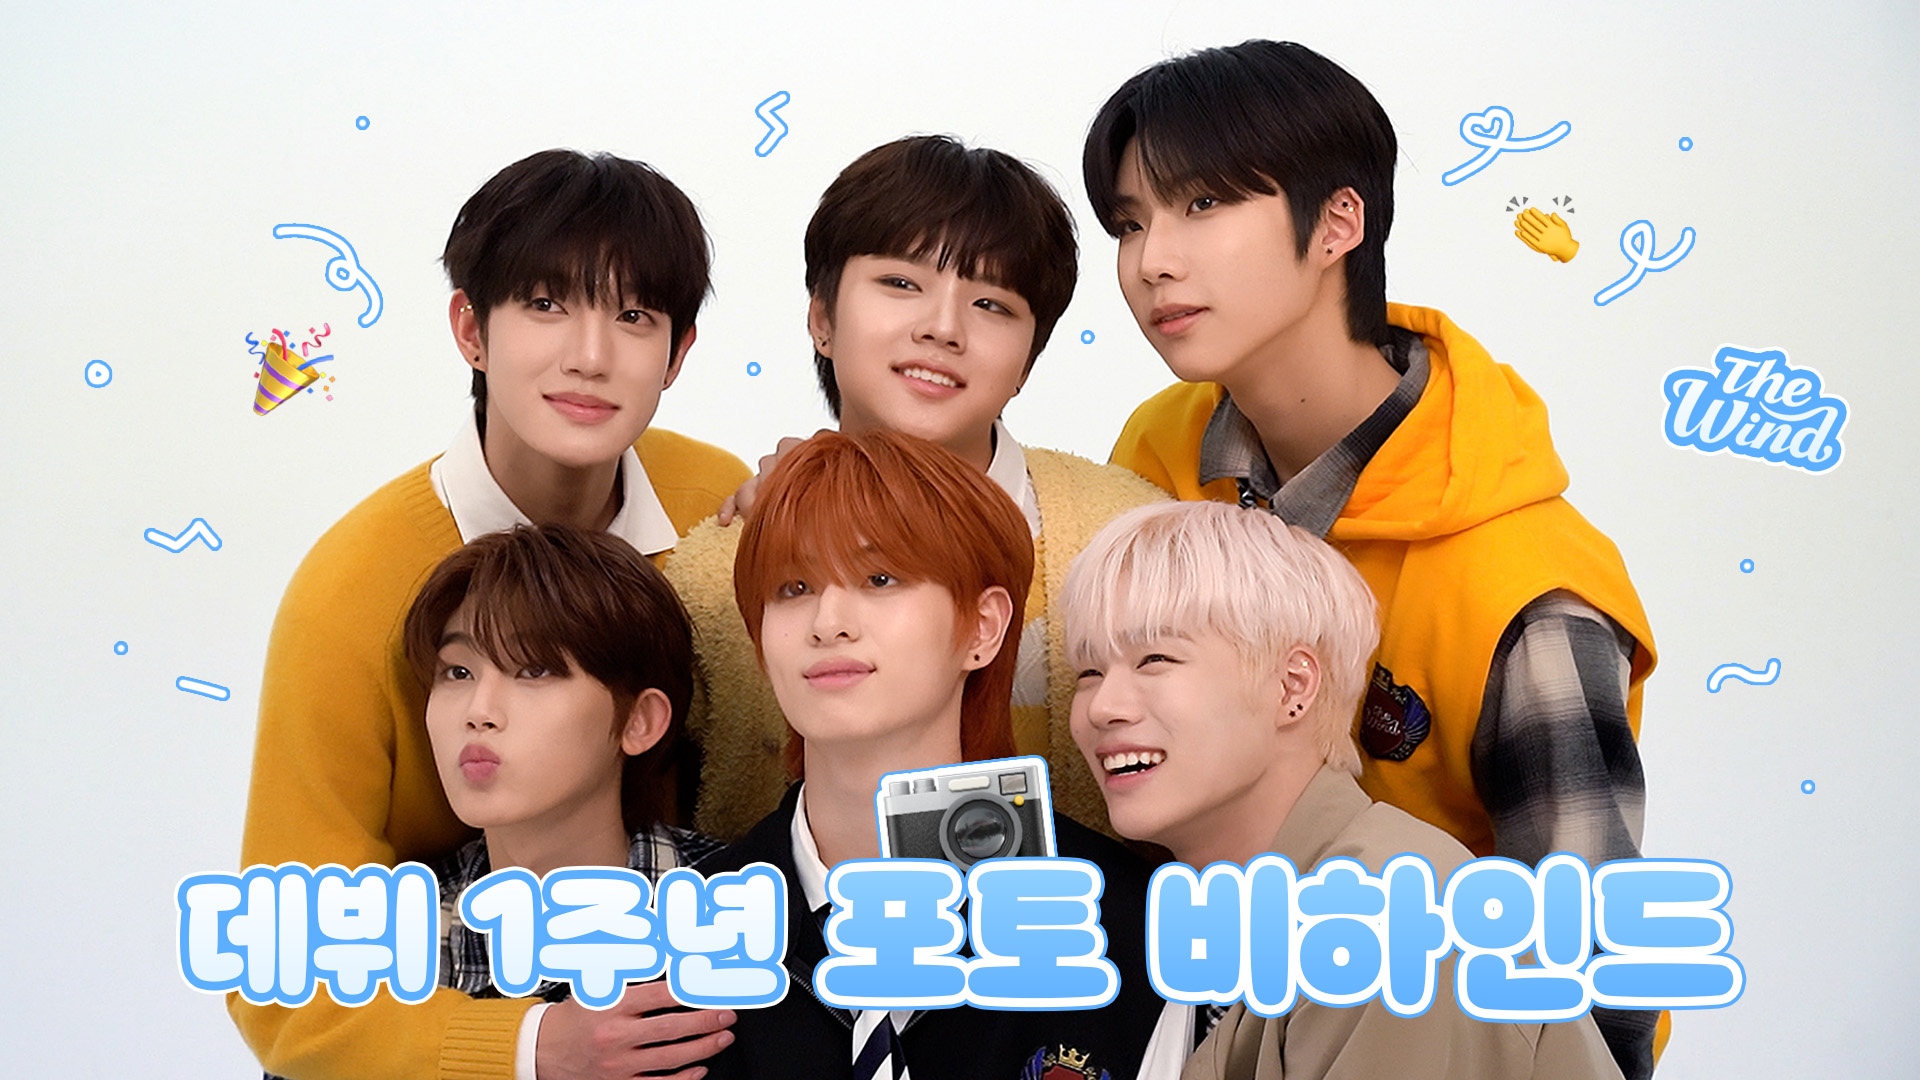  The Wind Debut 1st Anniversary Photo Behind